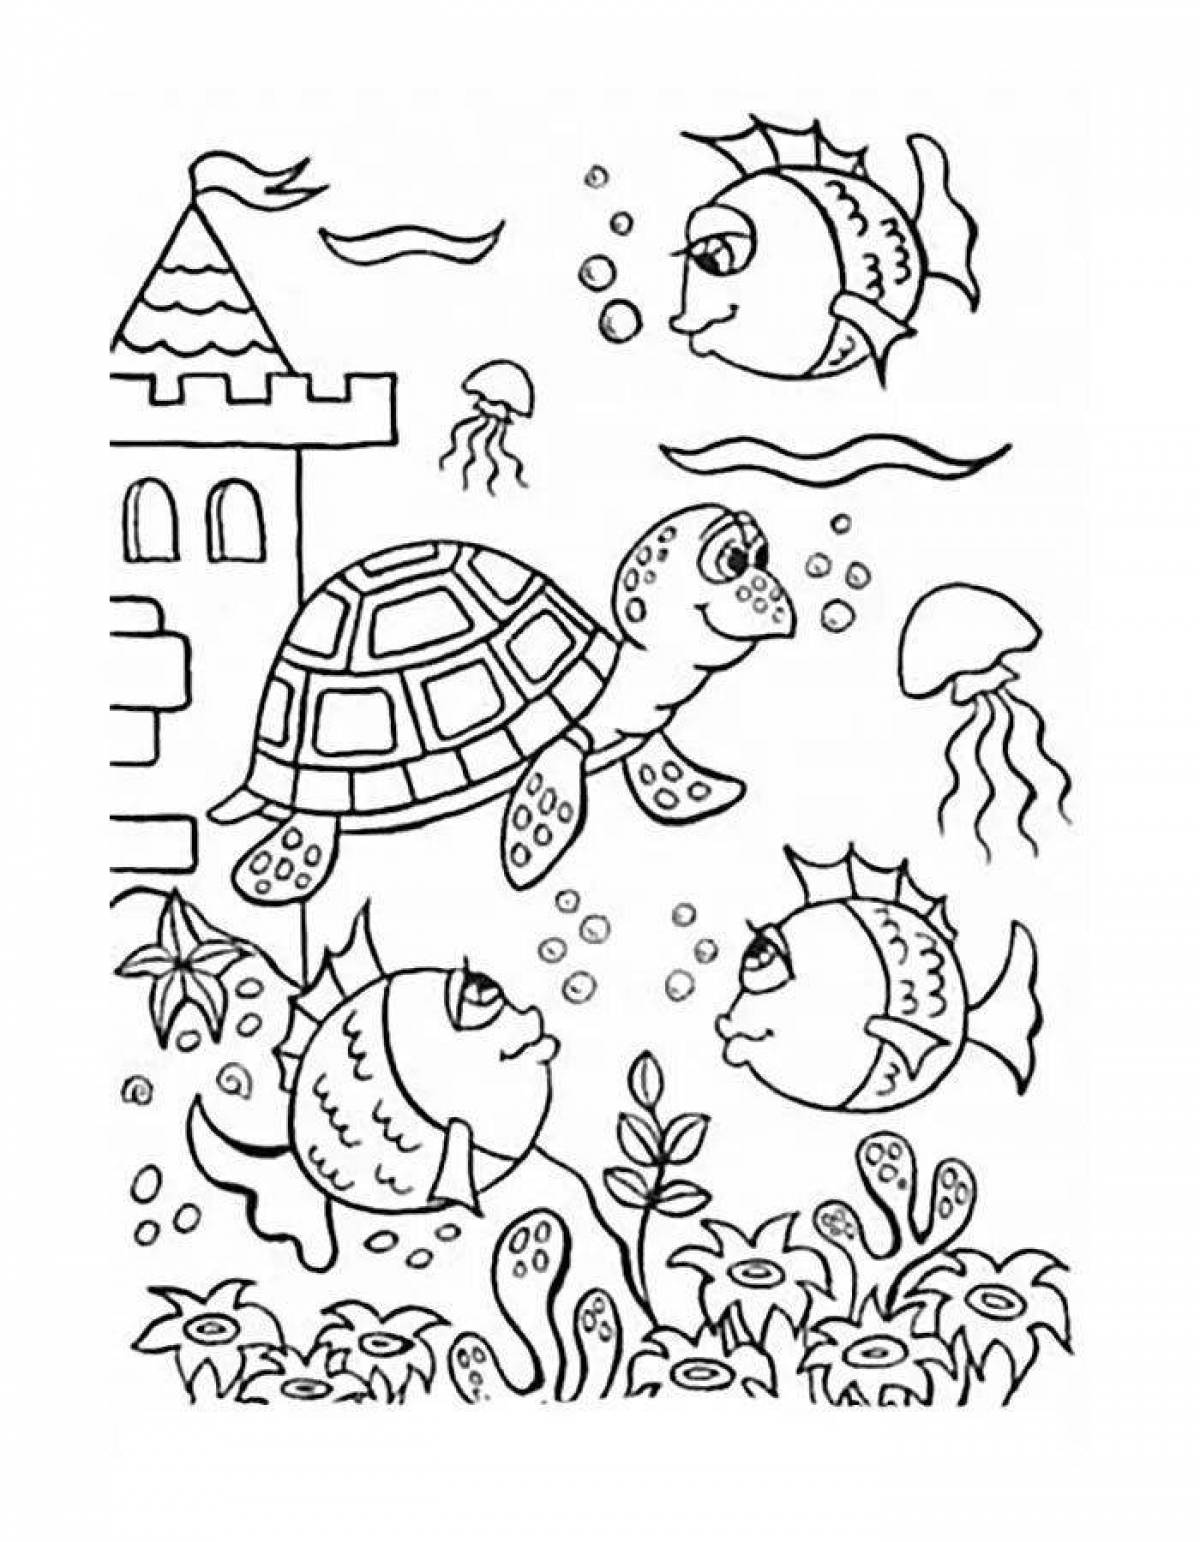 Sea world playful coloring page